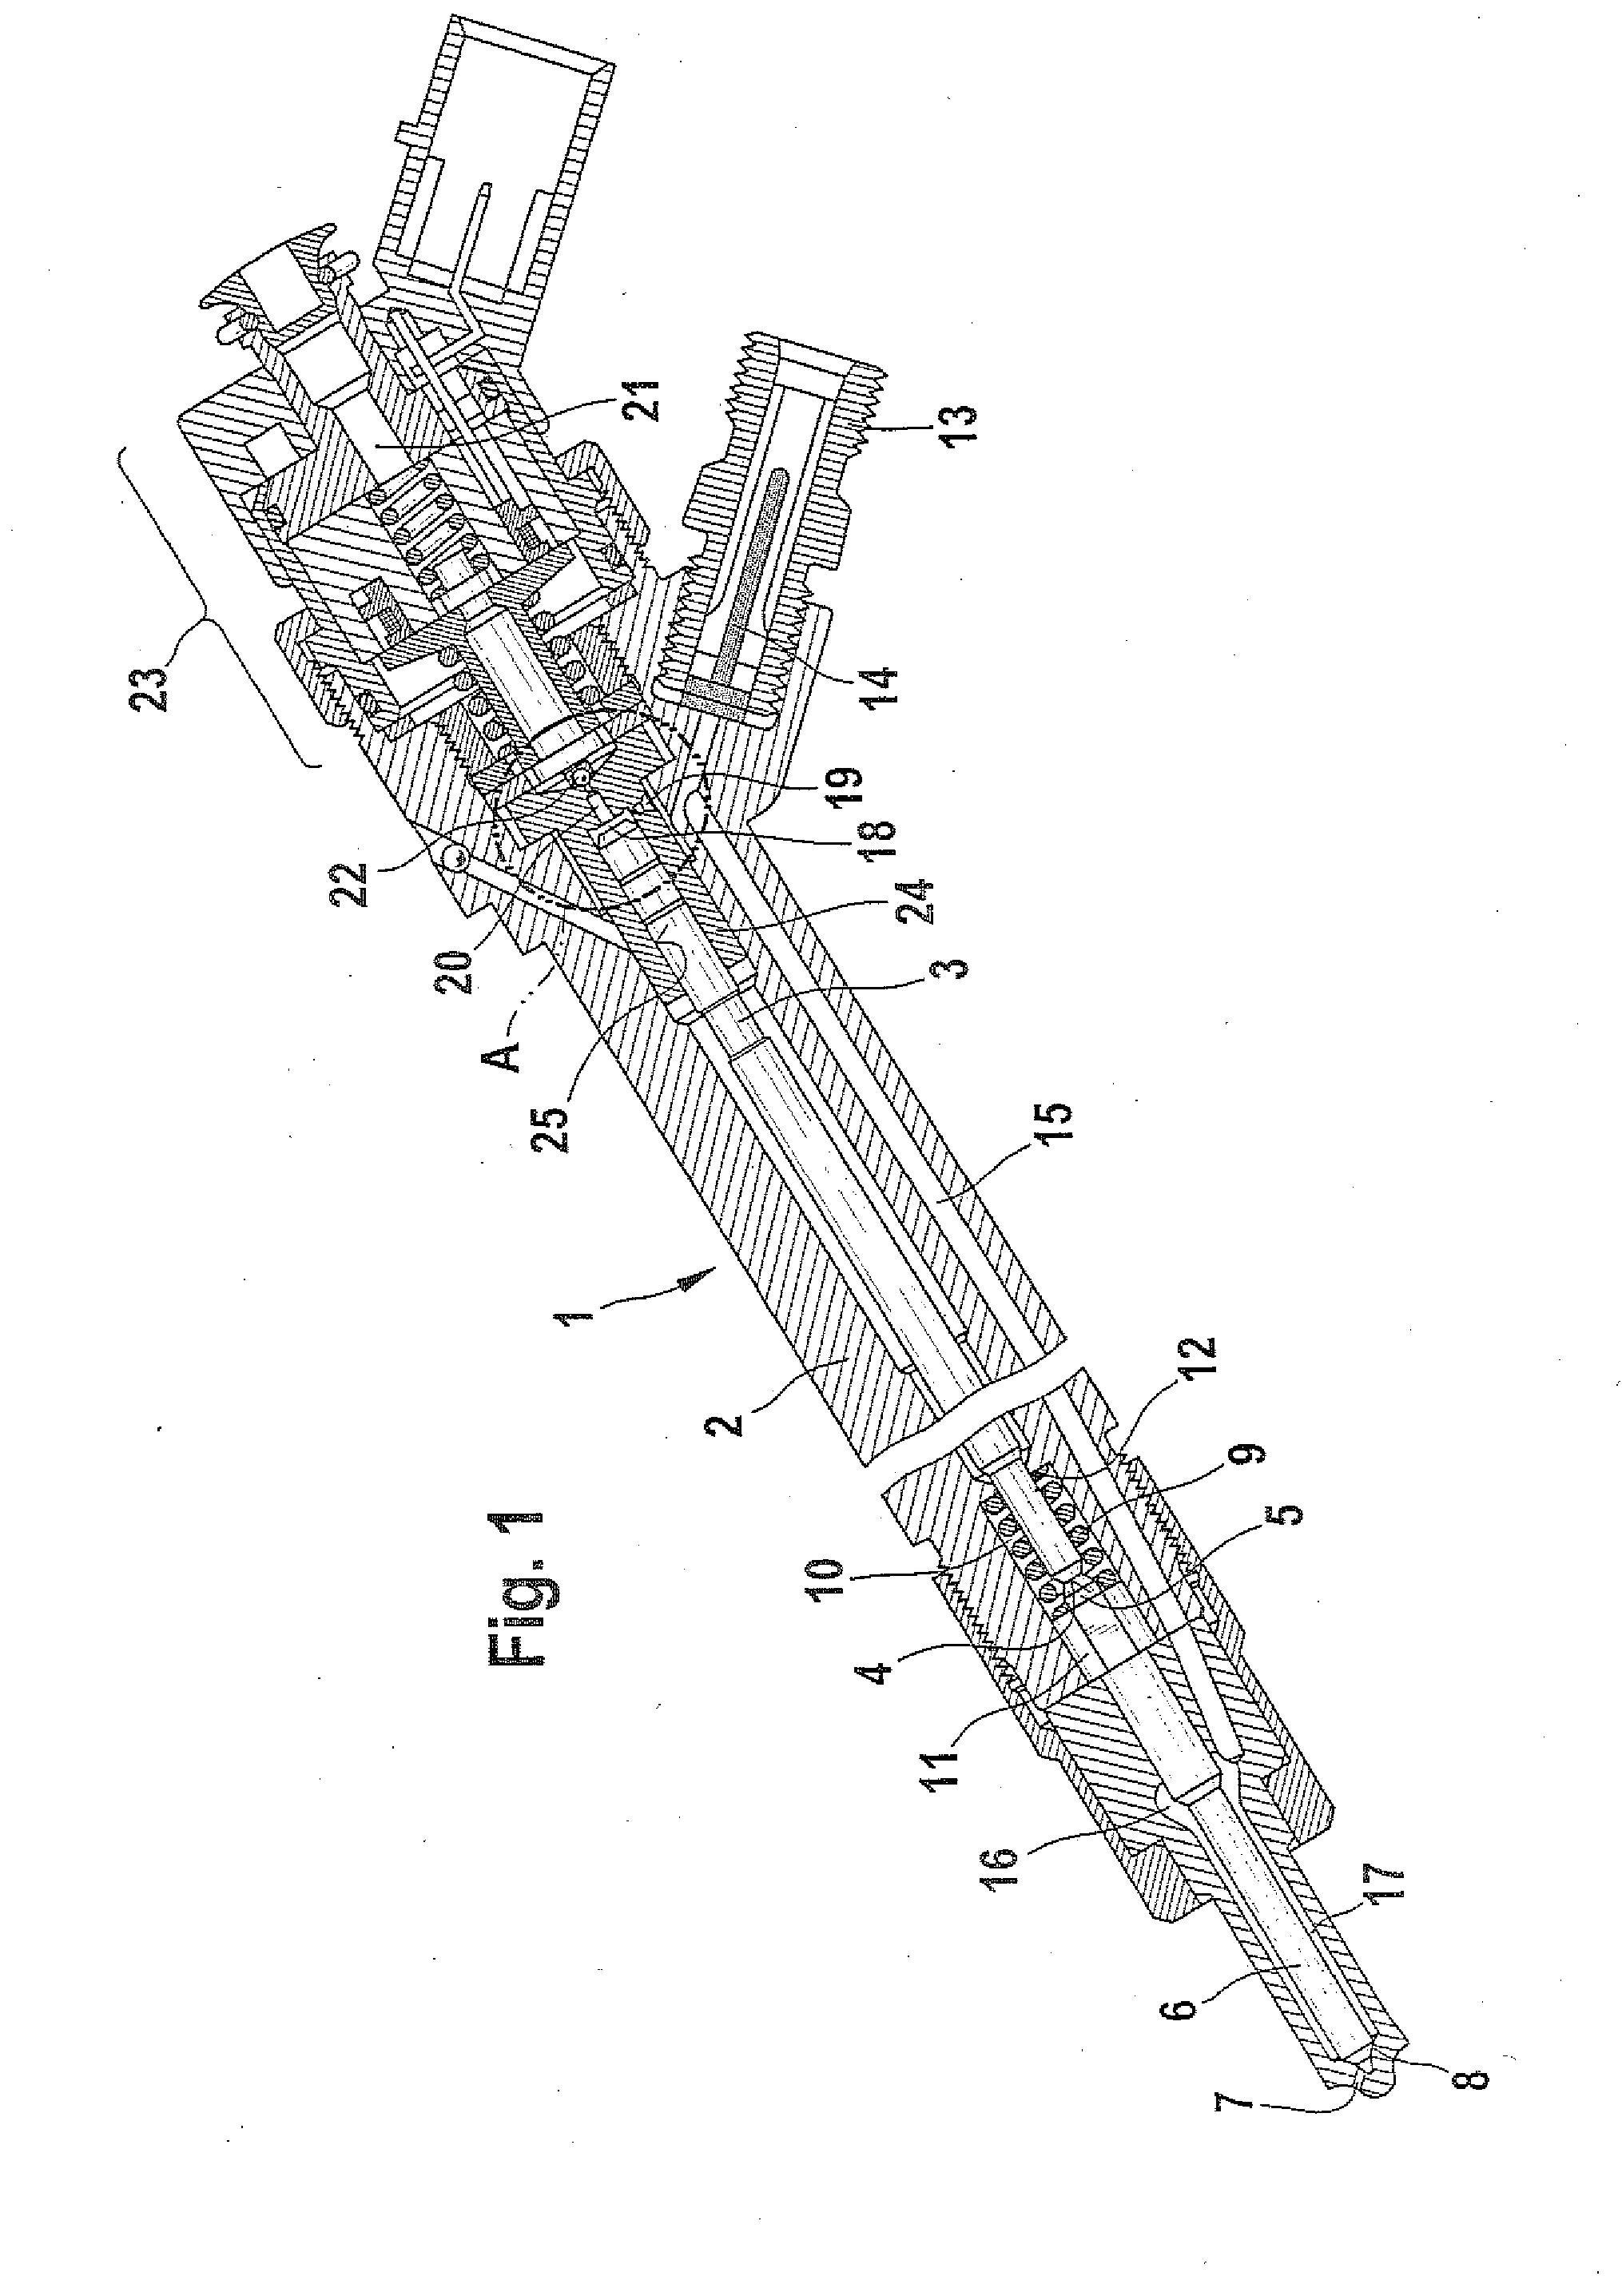 Fuel Injector with Punch-Formed Valve Seat for Reducing Armature Stroke Drift